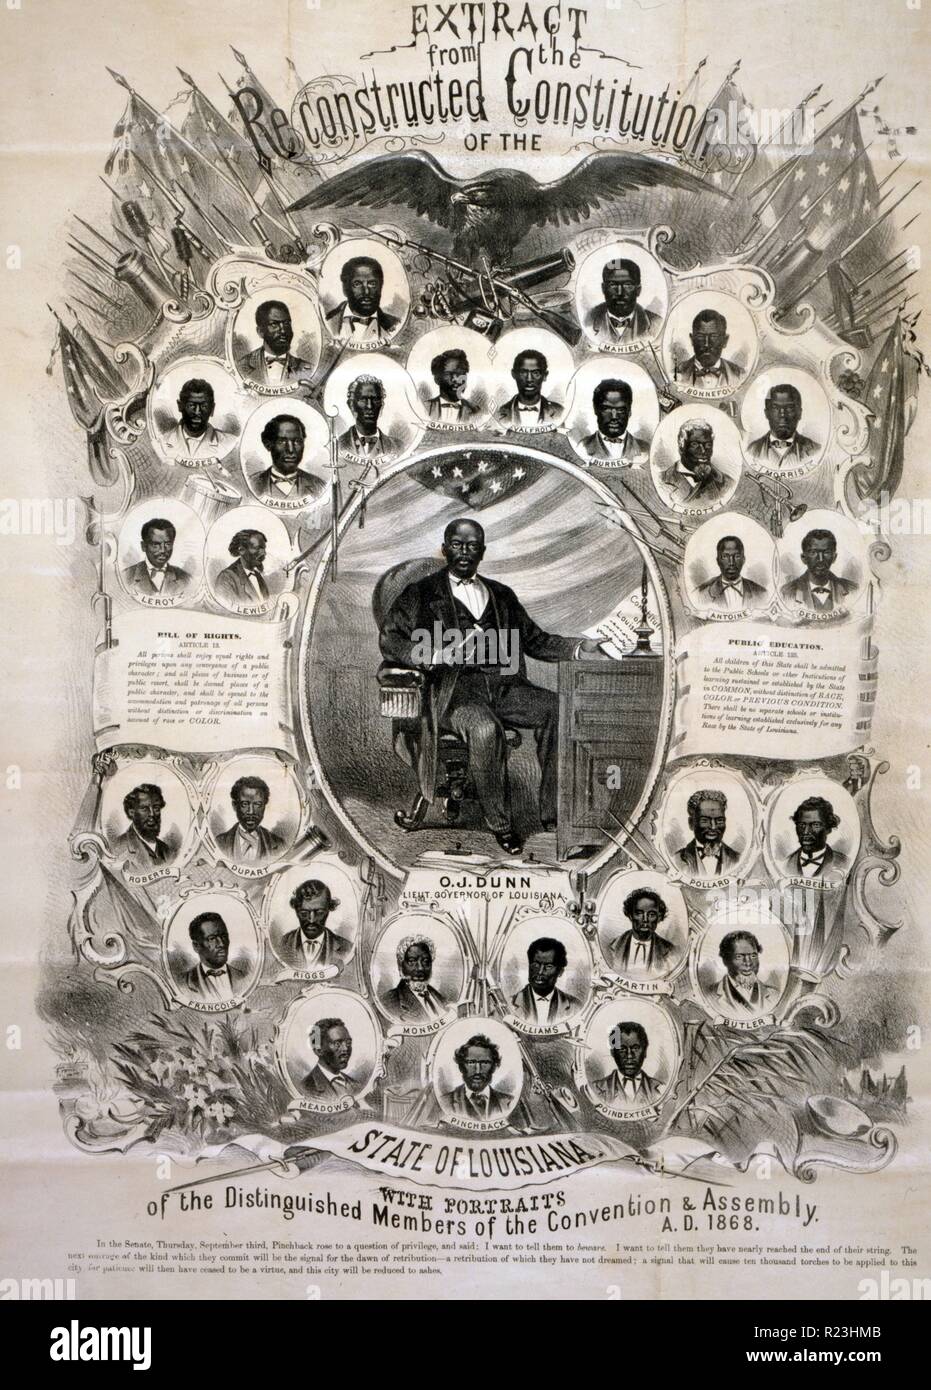 Extract from the reconstructed Constitution of the state of Louisiana, with portraits of the distinguished members of the Convention & Assembly. Full-length portrait of Oscar J. Dunn, Lieut. Governor of Louisiana, seated at desk, and twenty-nine head-and-shoulders portraits of African American delegates to the Louisiana Constitutional Convention. Stock Photo